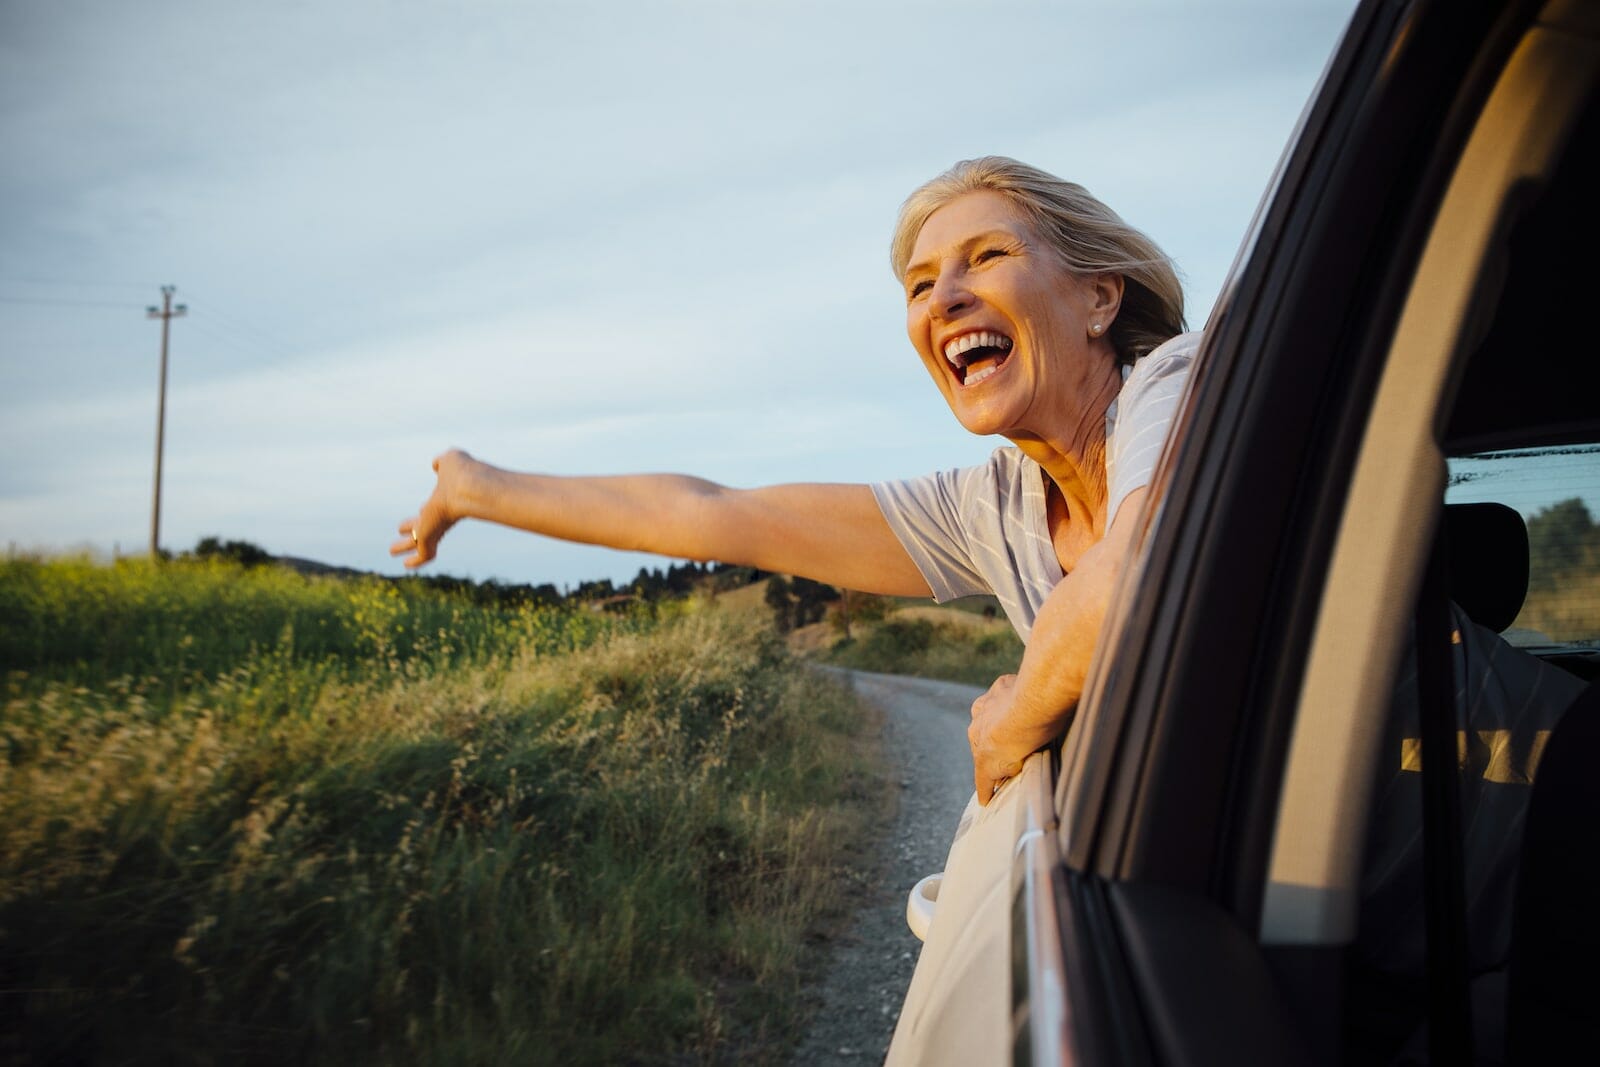 woman leaning out of car window, enjoying life, free of glaucoma eye drops after istent surgery